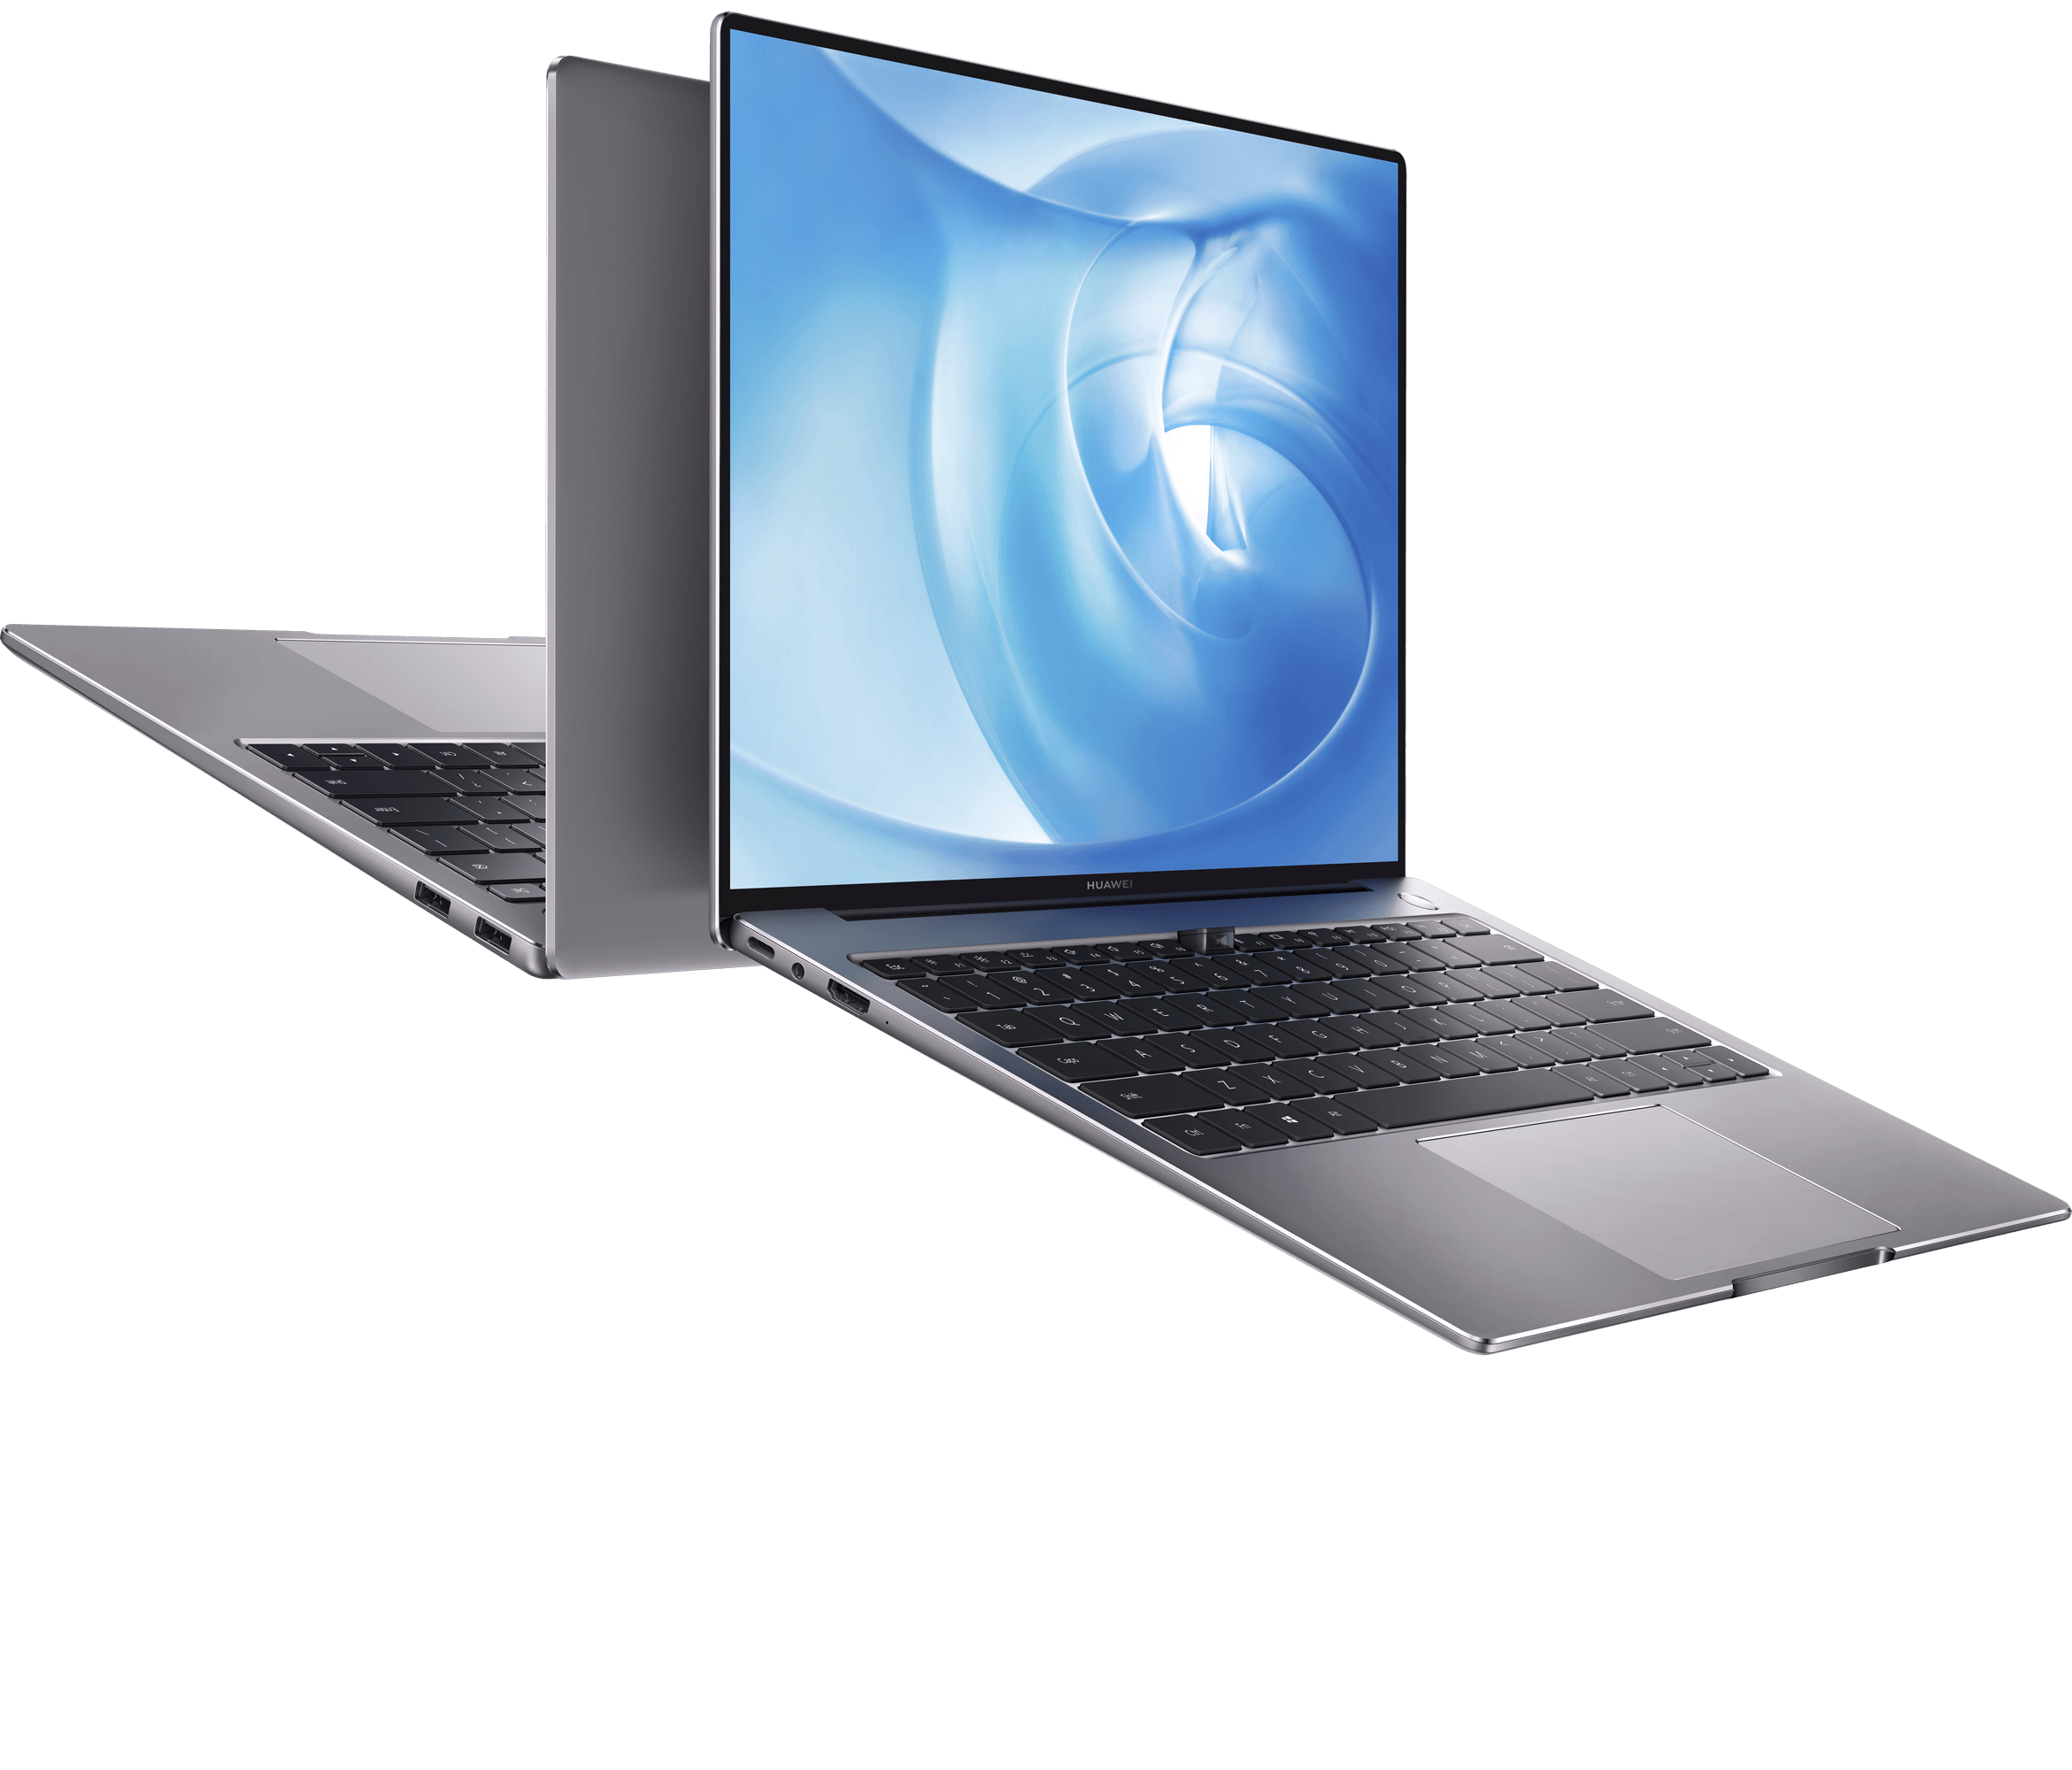 Huawei MateBook 14: Specs, price in the Philippines